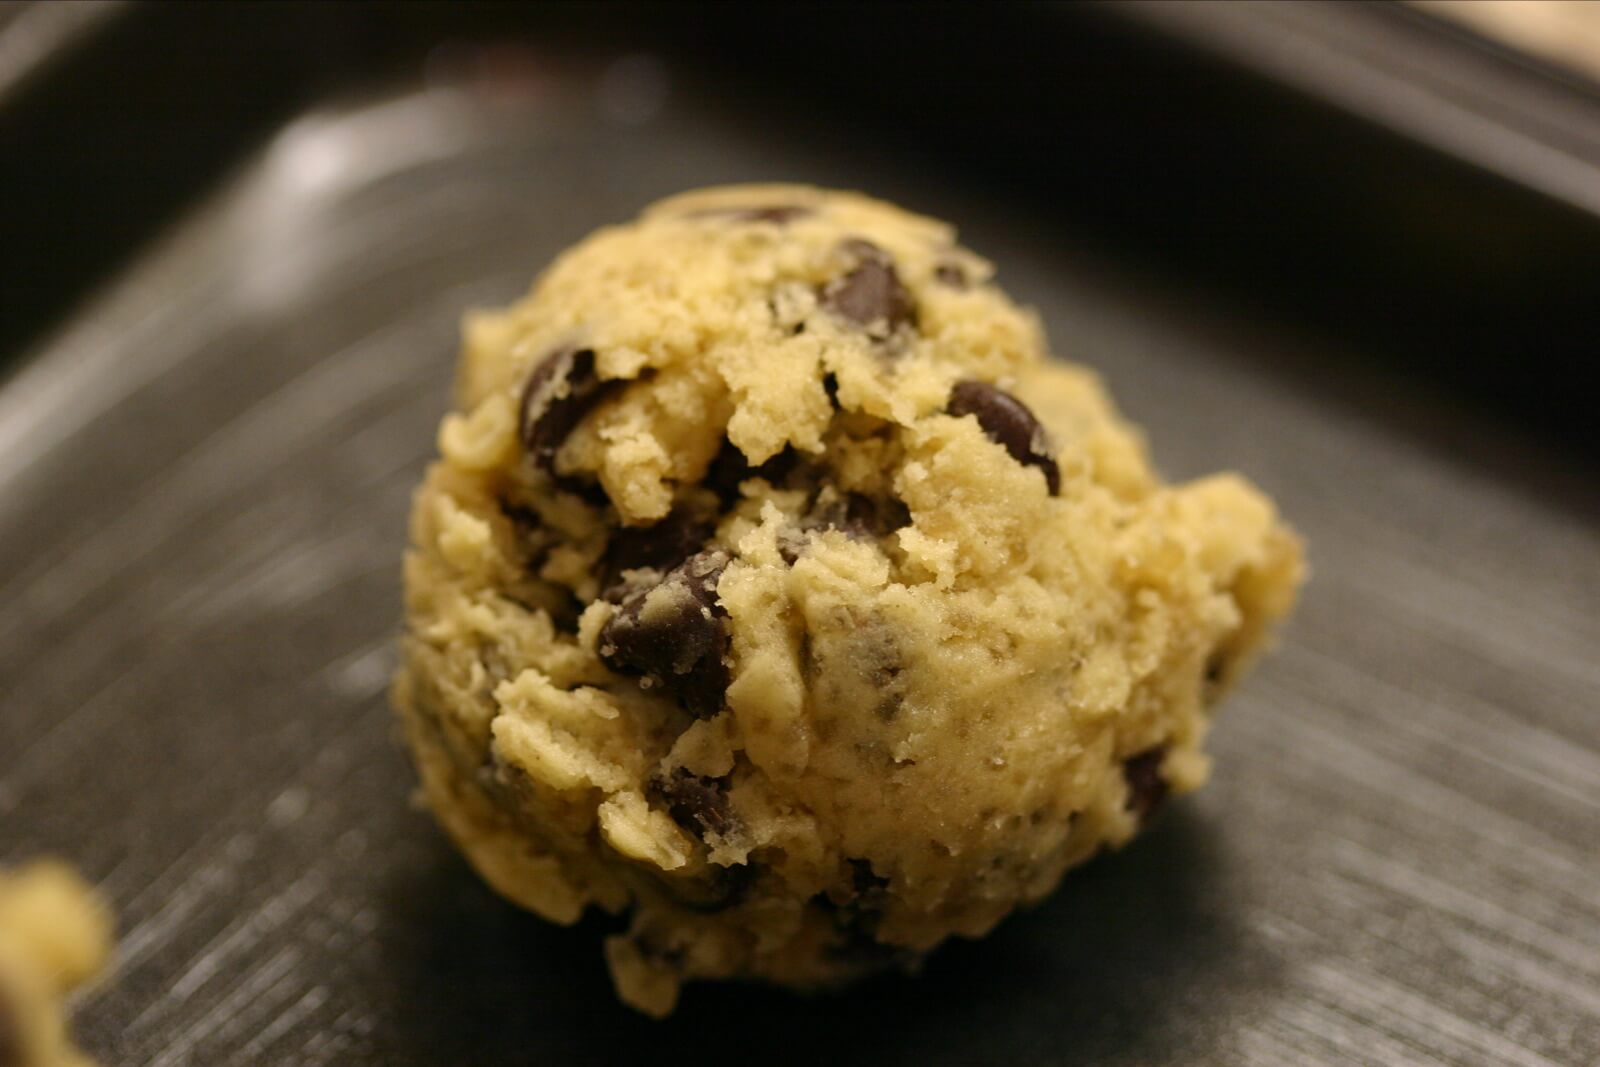 eat cookie dough on 4/20